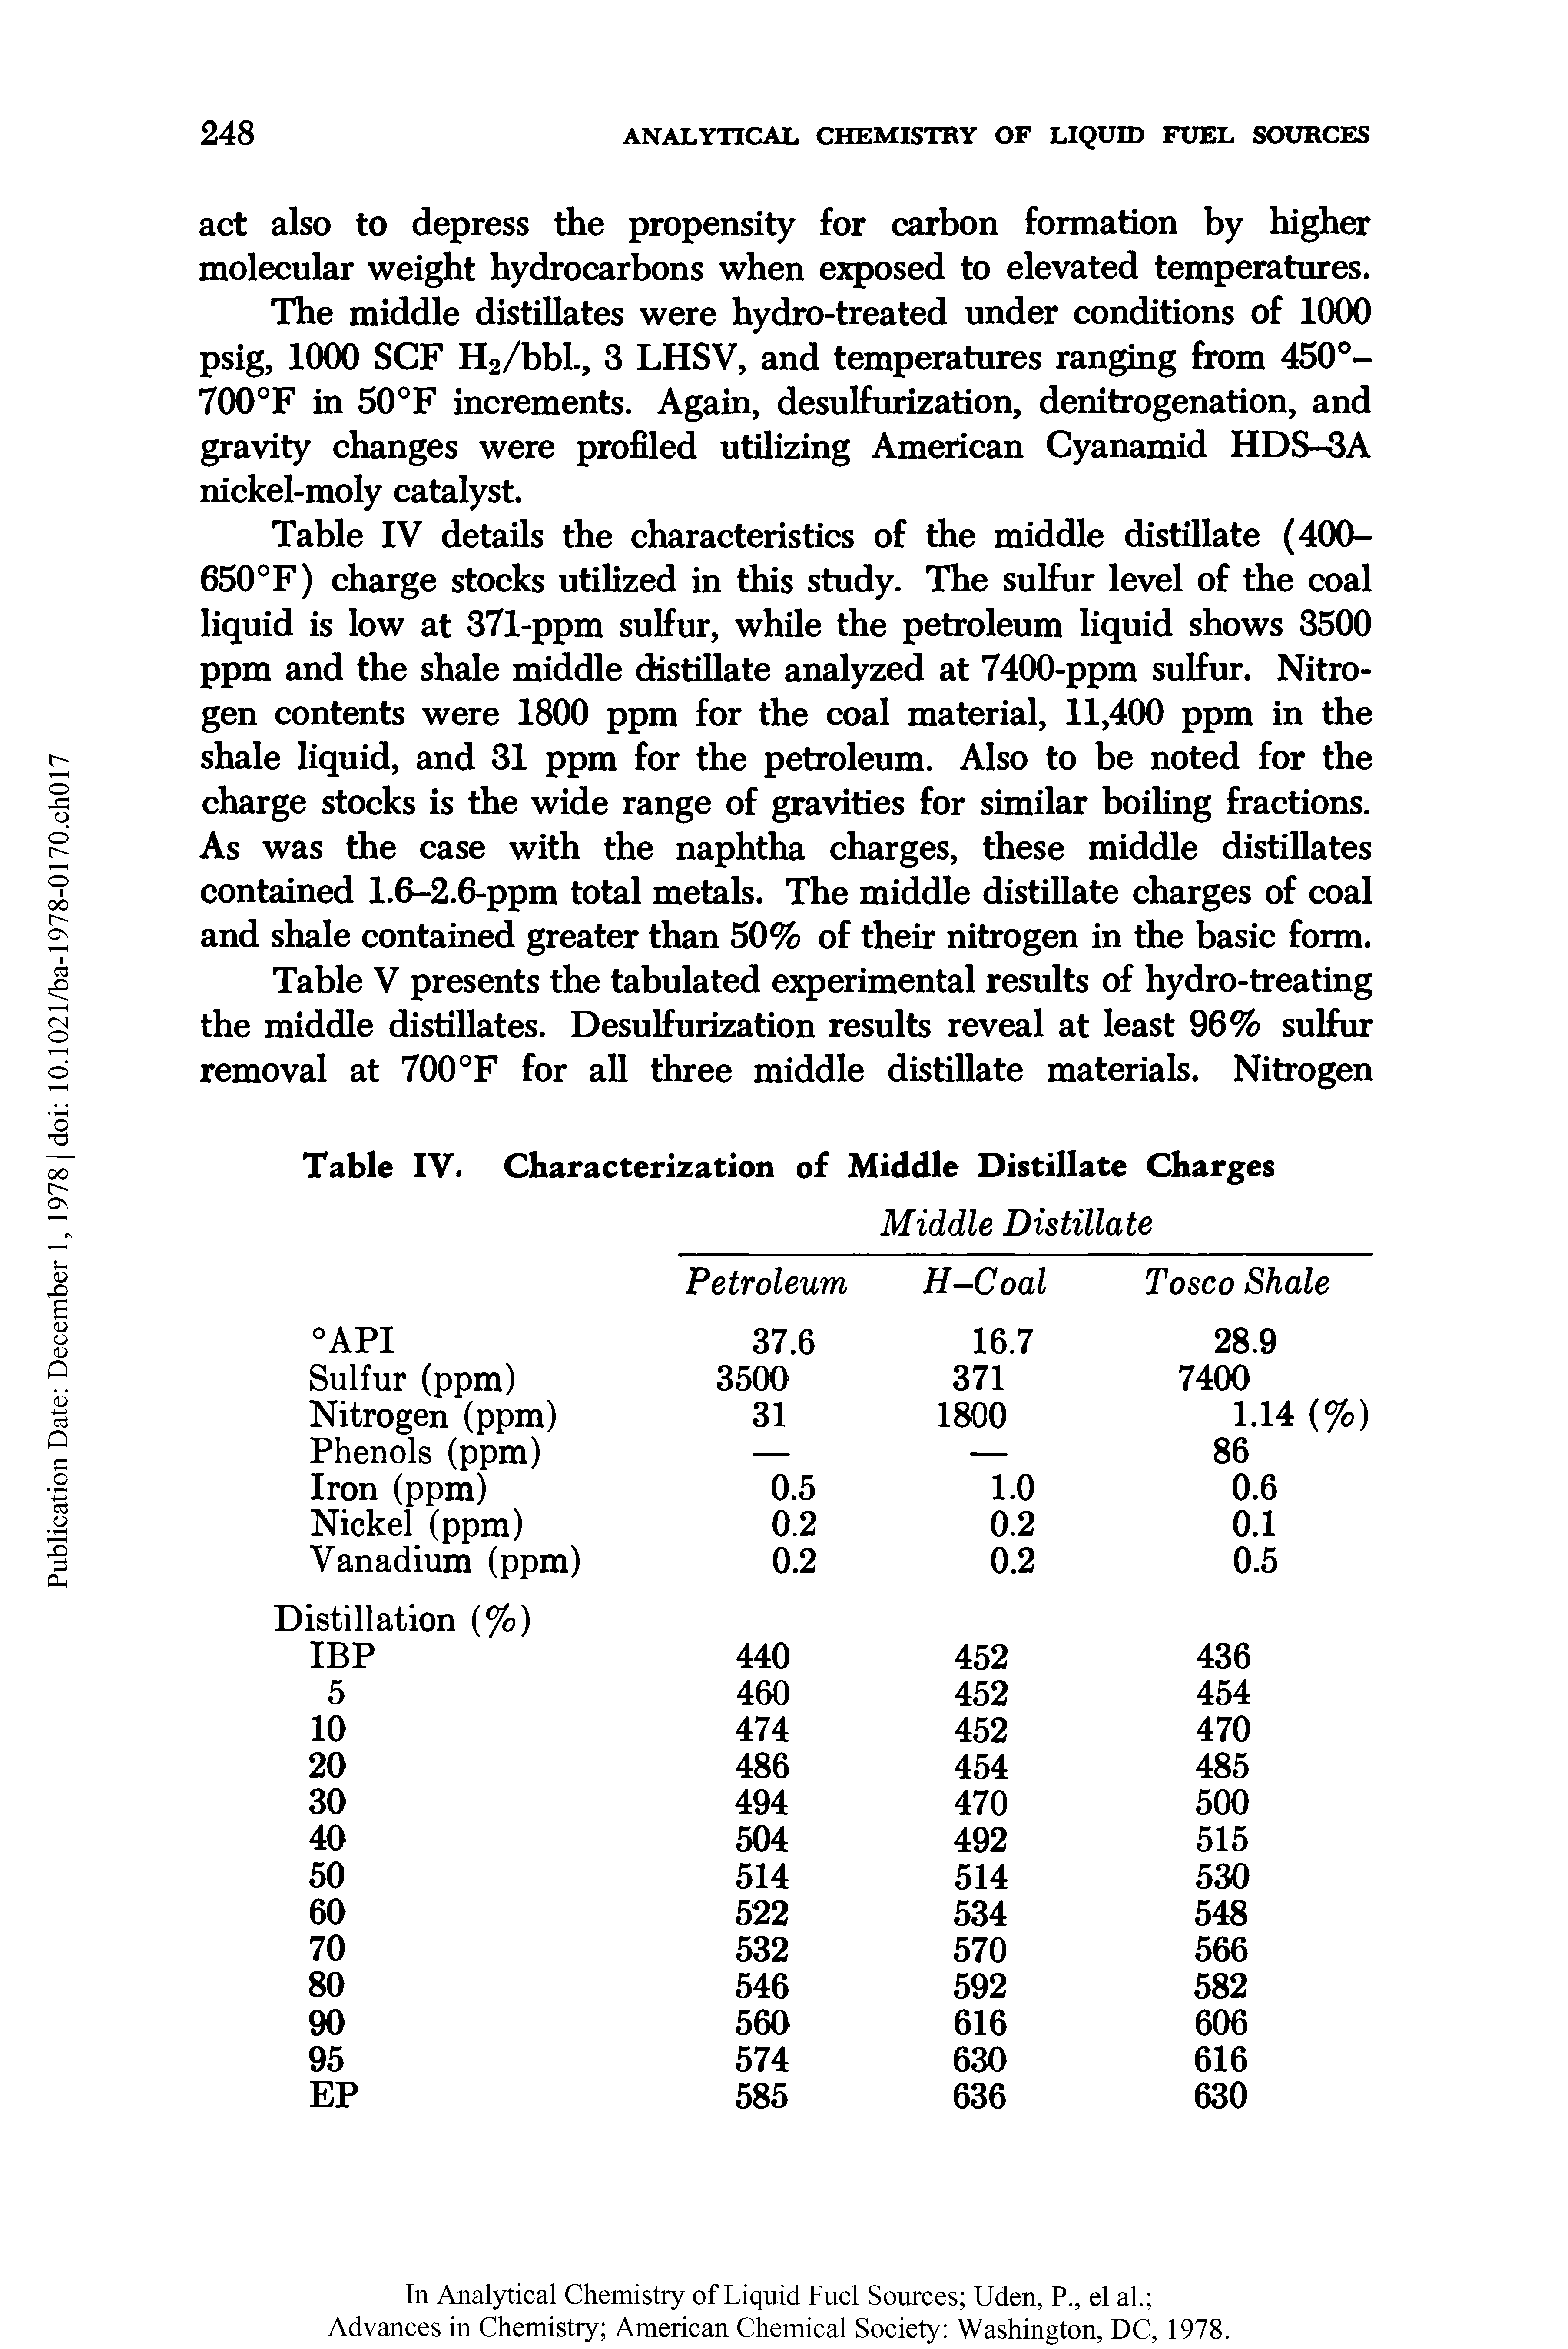 Table IV details the characteristics of the middle distillate (400-650 F) charge stocks utilized in this study. The sulfur level of the coal liquid is low at 371-ppm sulfur, while the petroleum liquid shows 3500 ppm and the shale middle distillate analyzed at 7400-ppm sulfur. Nitrogen contents were 1800 ppm for the coal material, 11,400 ppm in the shale liquid, and 31 ppm for the petroleum. Also to be noted for the charge stocks is the wide range of gravities for similar boiling fractions. As was the case with the naphtha charges, these middle distillates contained 1.6-2.6-ppm total metals. The middle distillate charges of coal and shale contained greater than 50% of their nitrogen in the basic form.